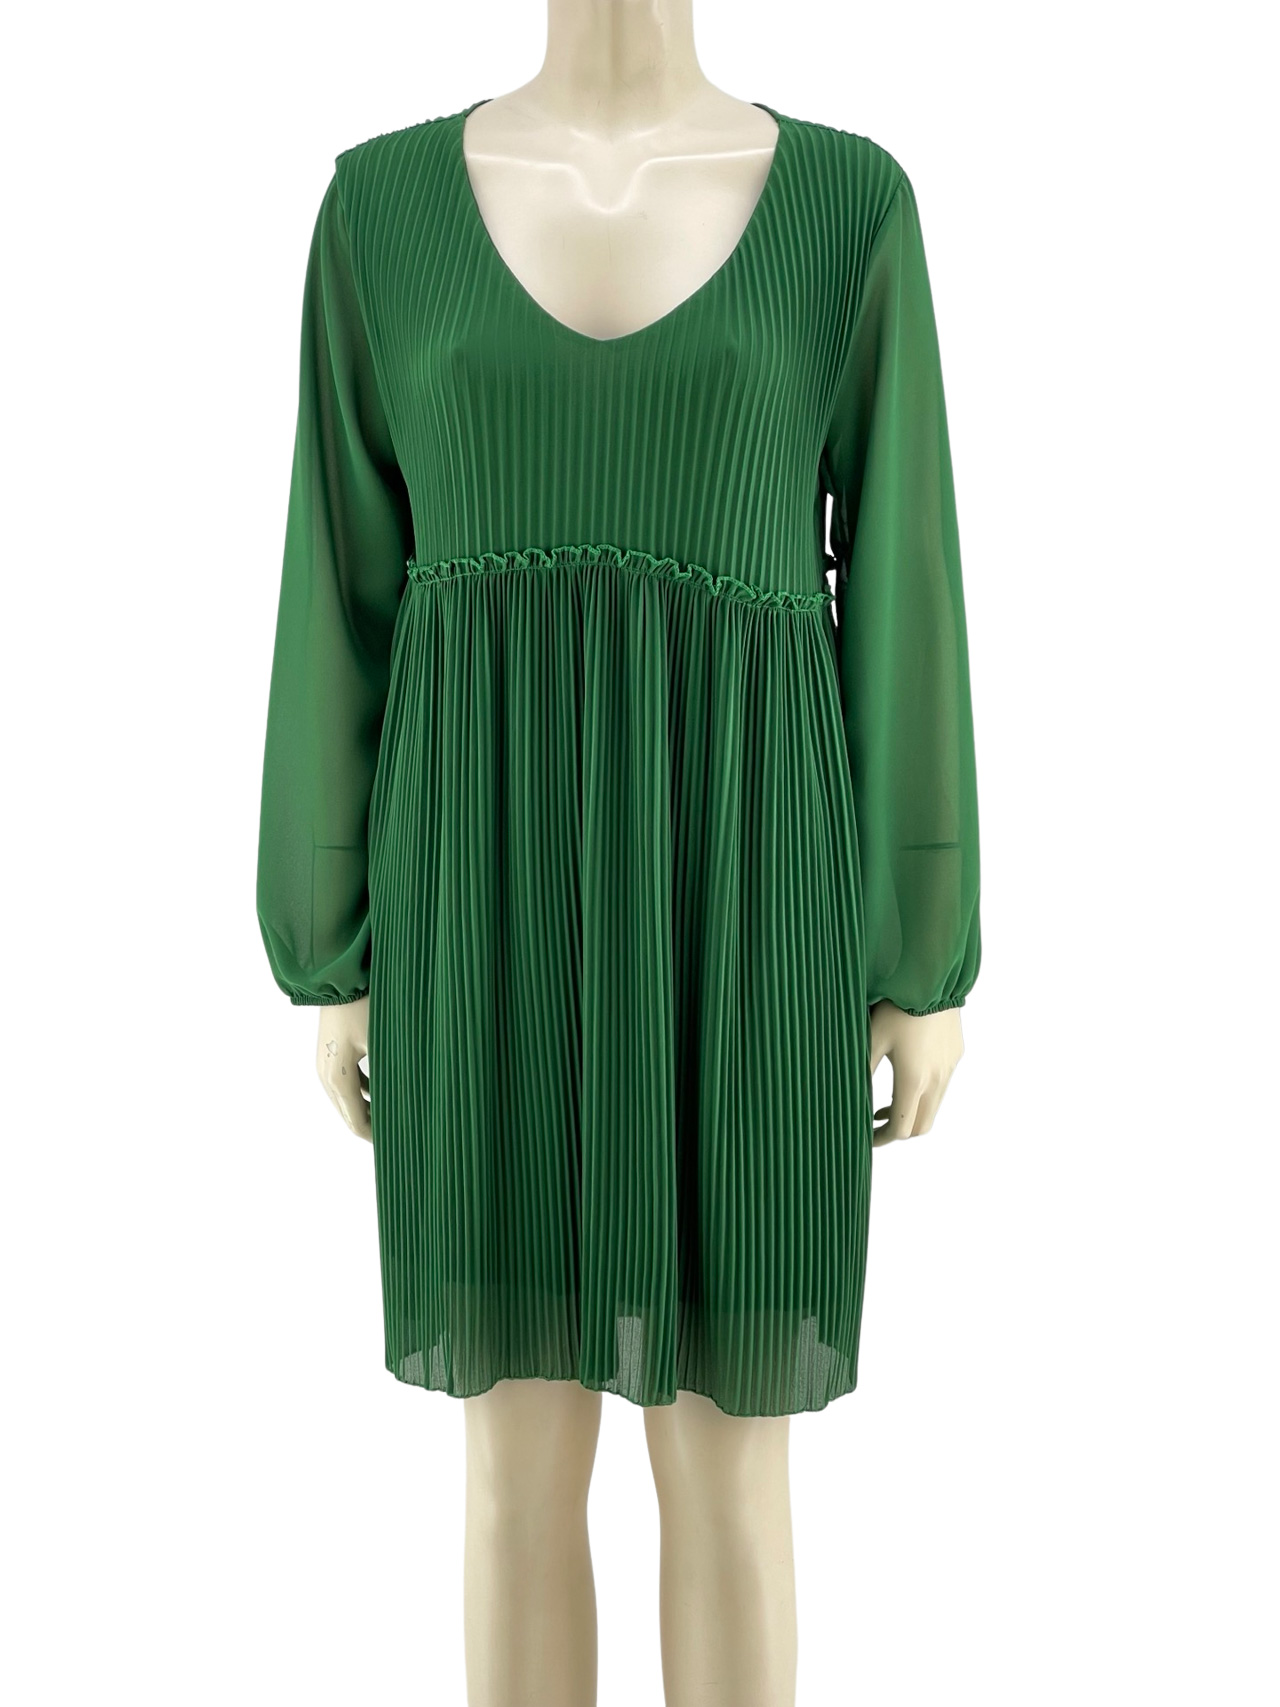 V-neck pleated dress code 10107 front side - green